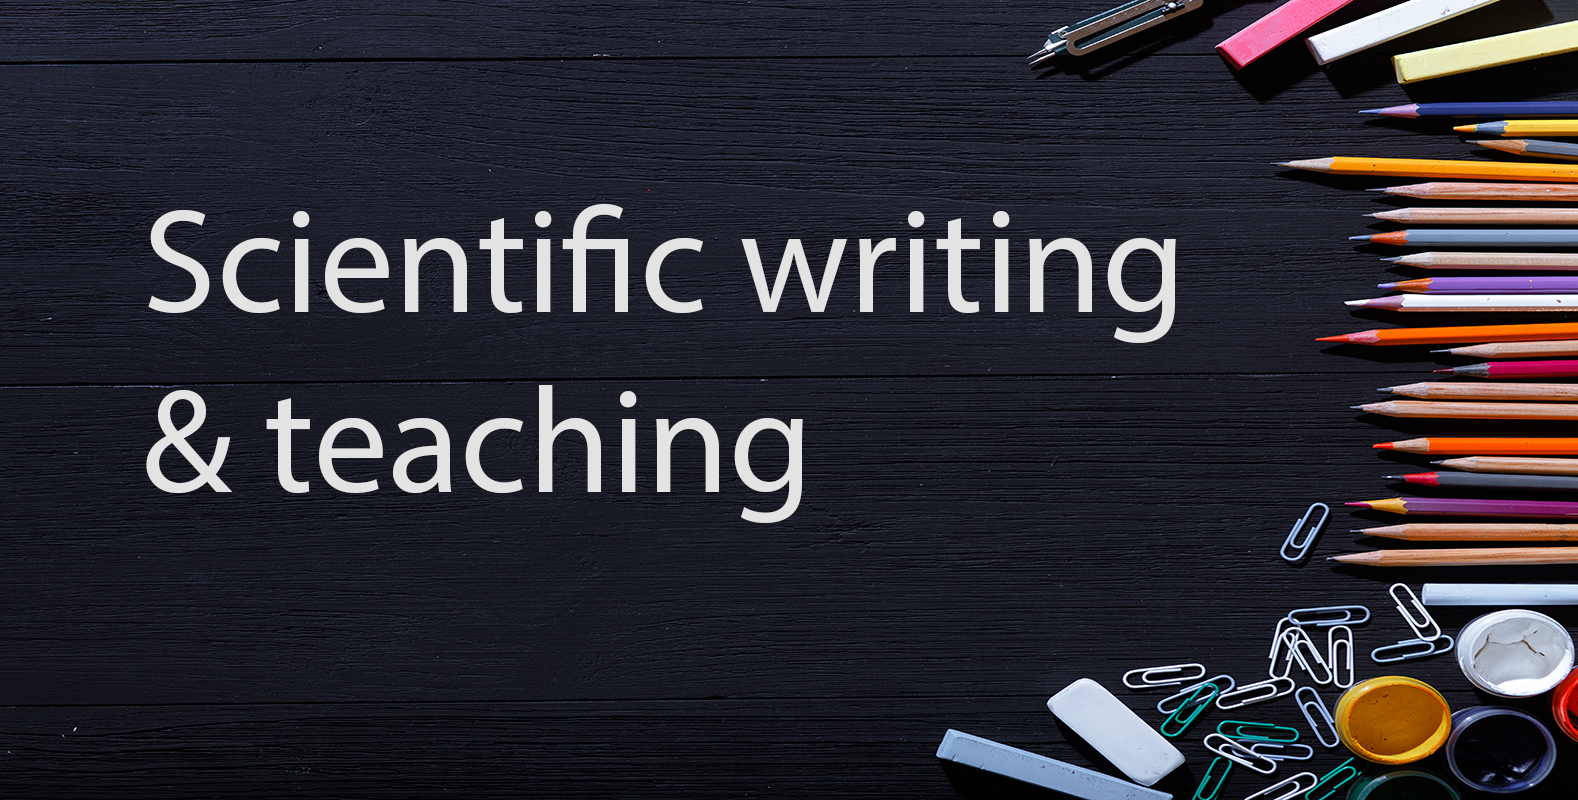 Scientific writing & outreach